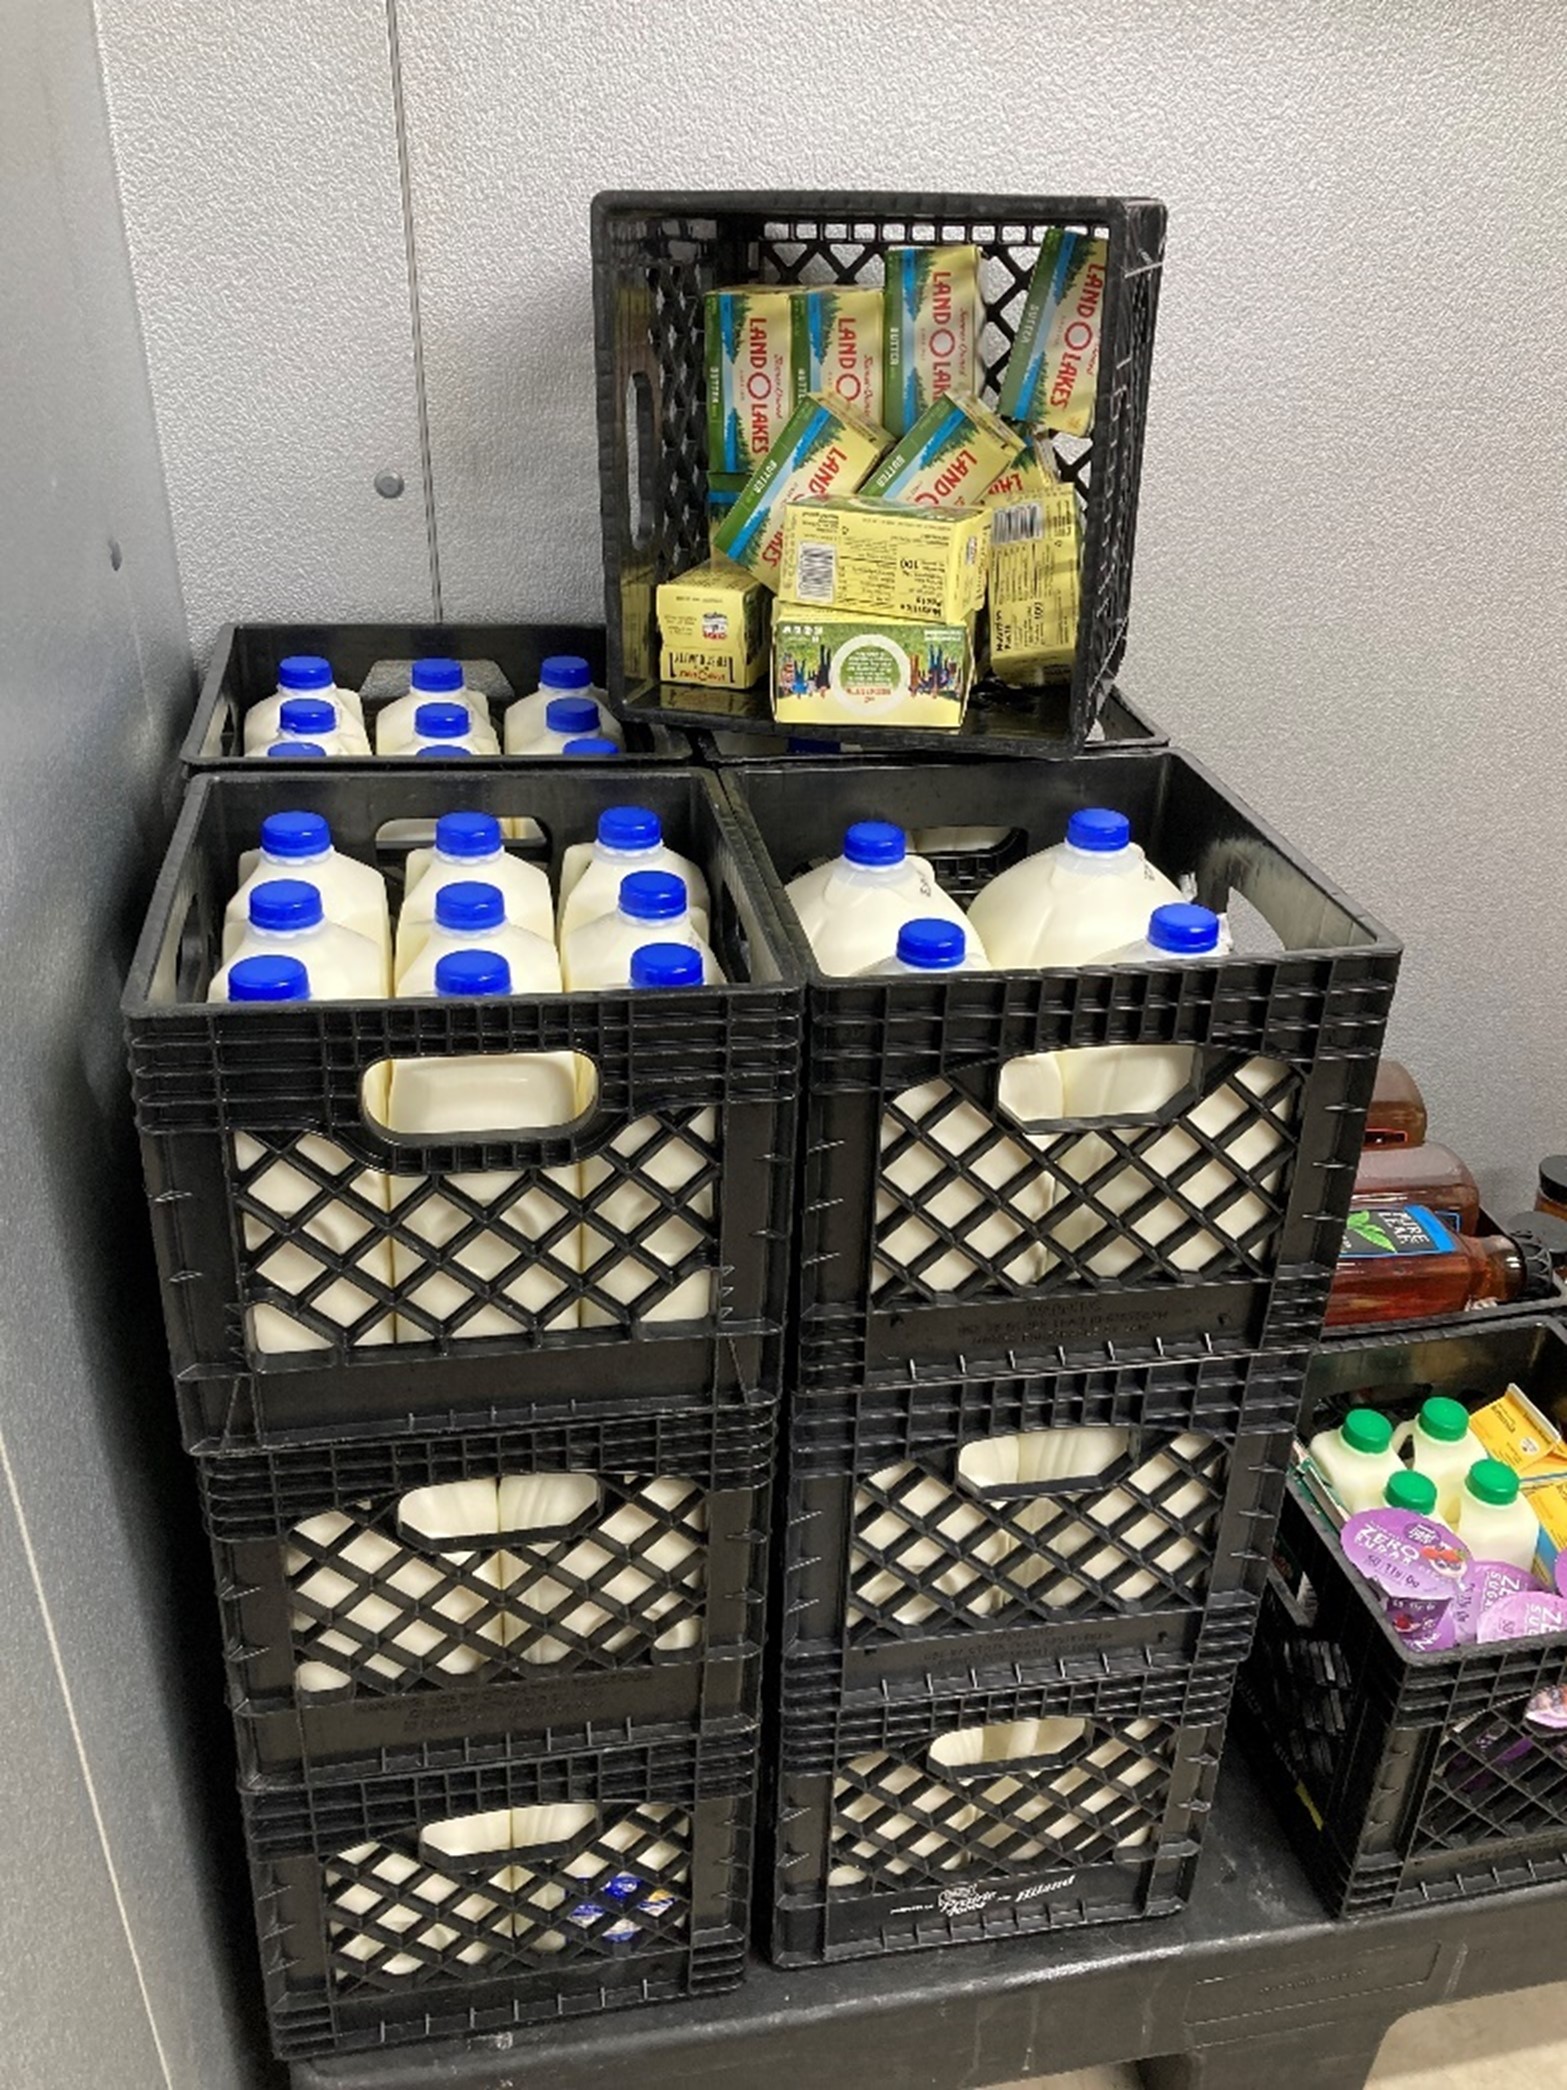 Several crates of milk jugs stacked in a cooler